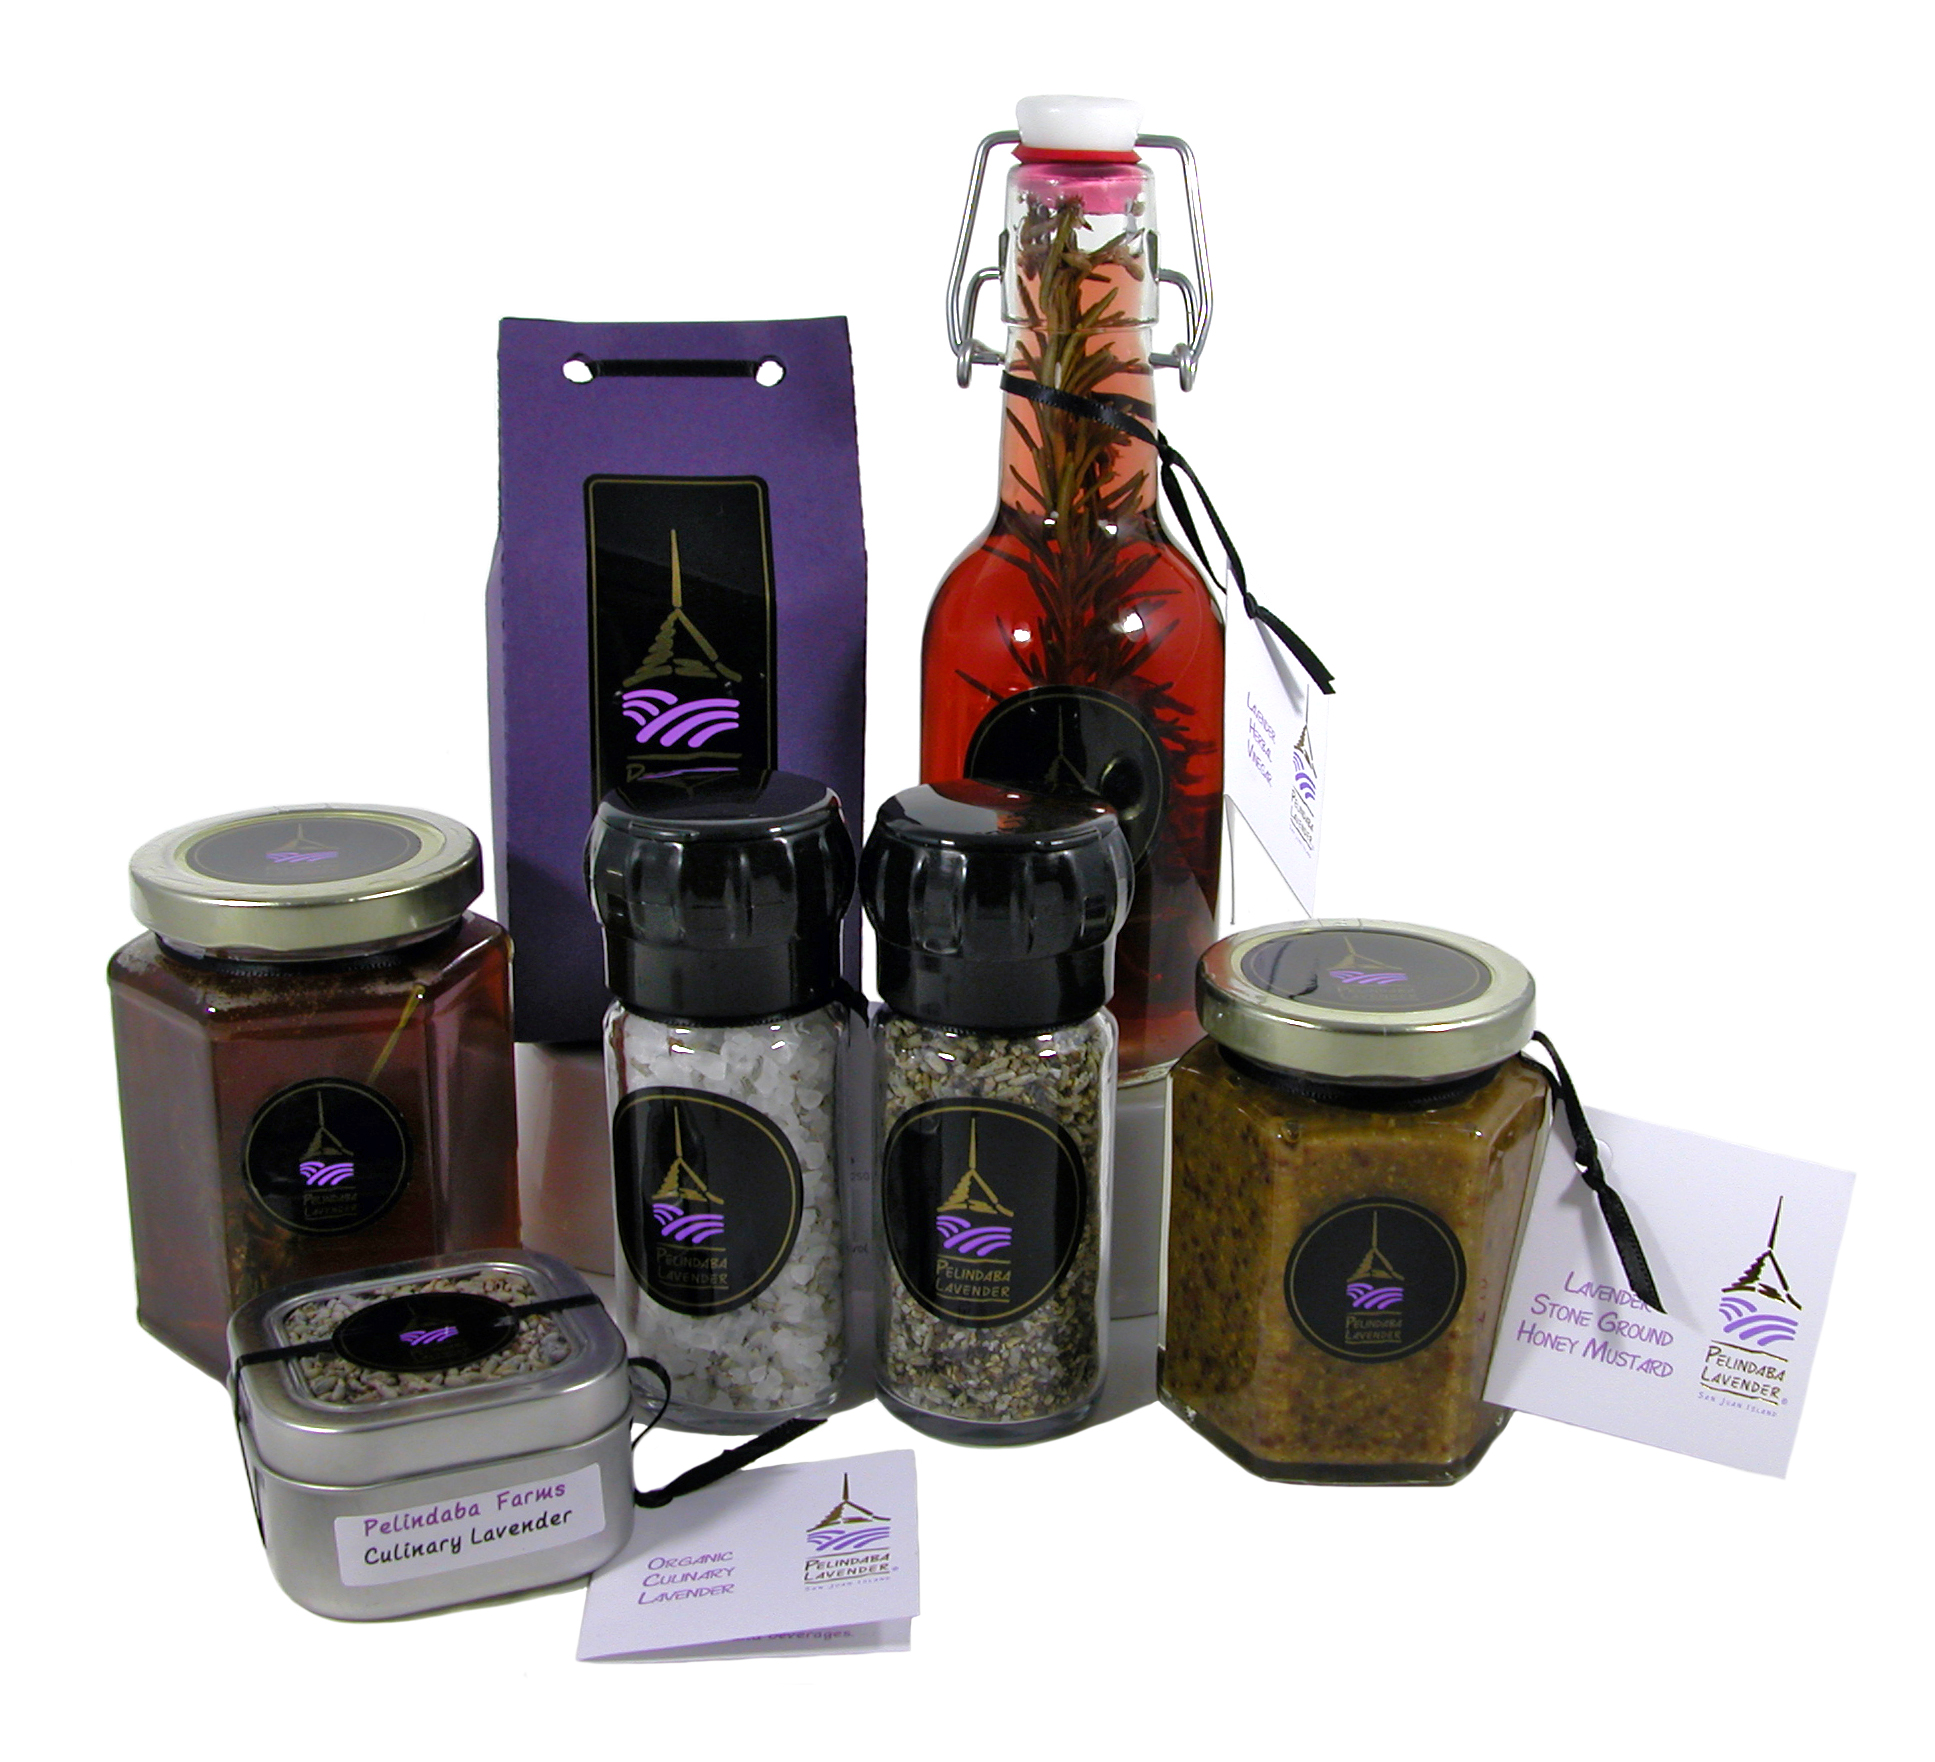 organic lavender culinary products from Pelindaba Lavender